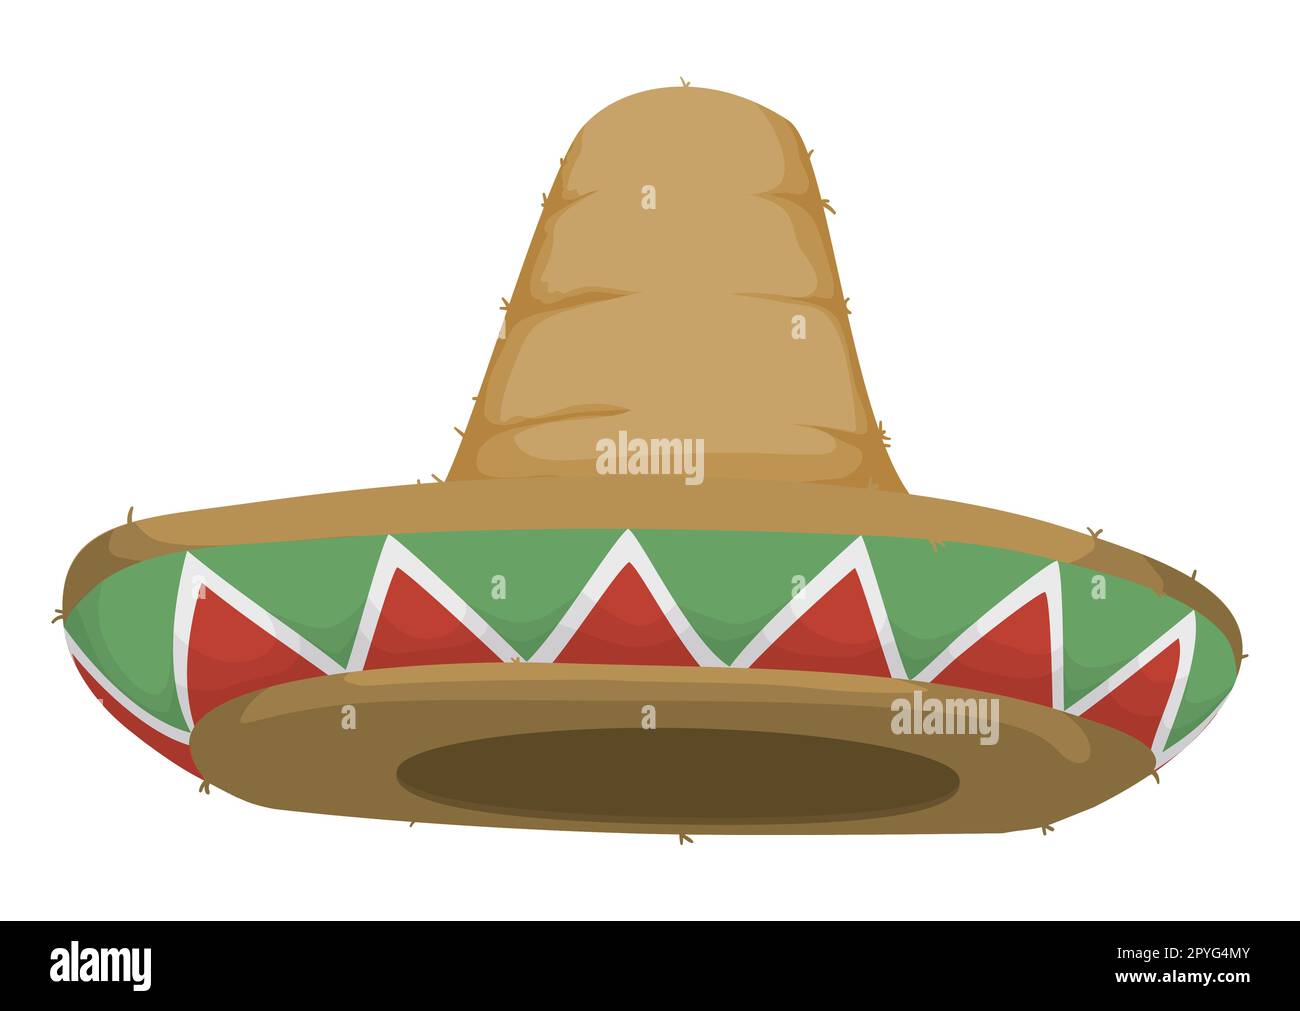 Mexican design in sombrero or charro hat made with rustic straw, decorated with green, white and red triangles in the brim. Stock Vector